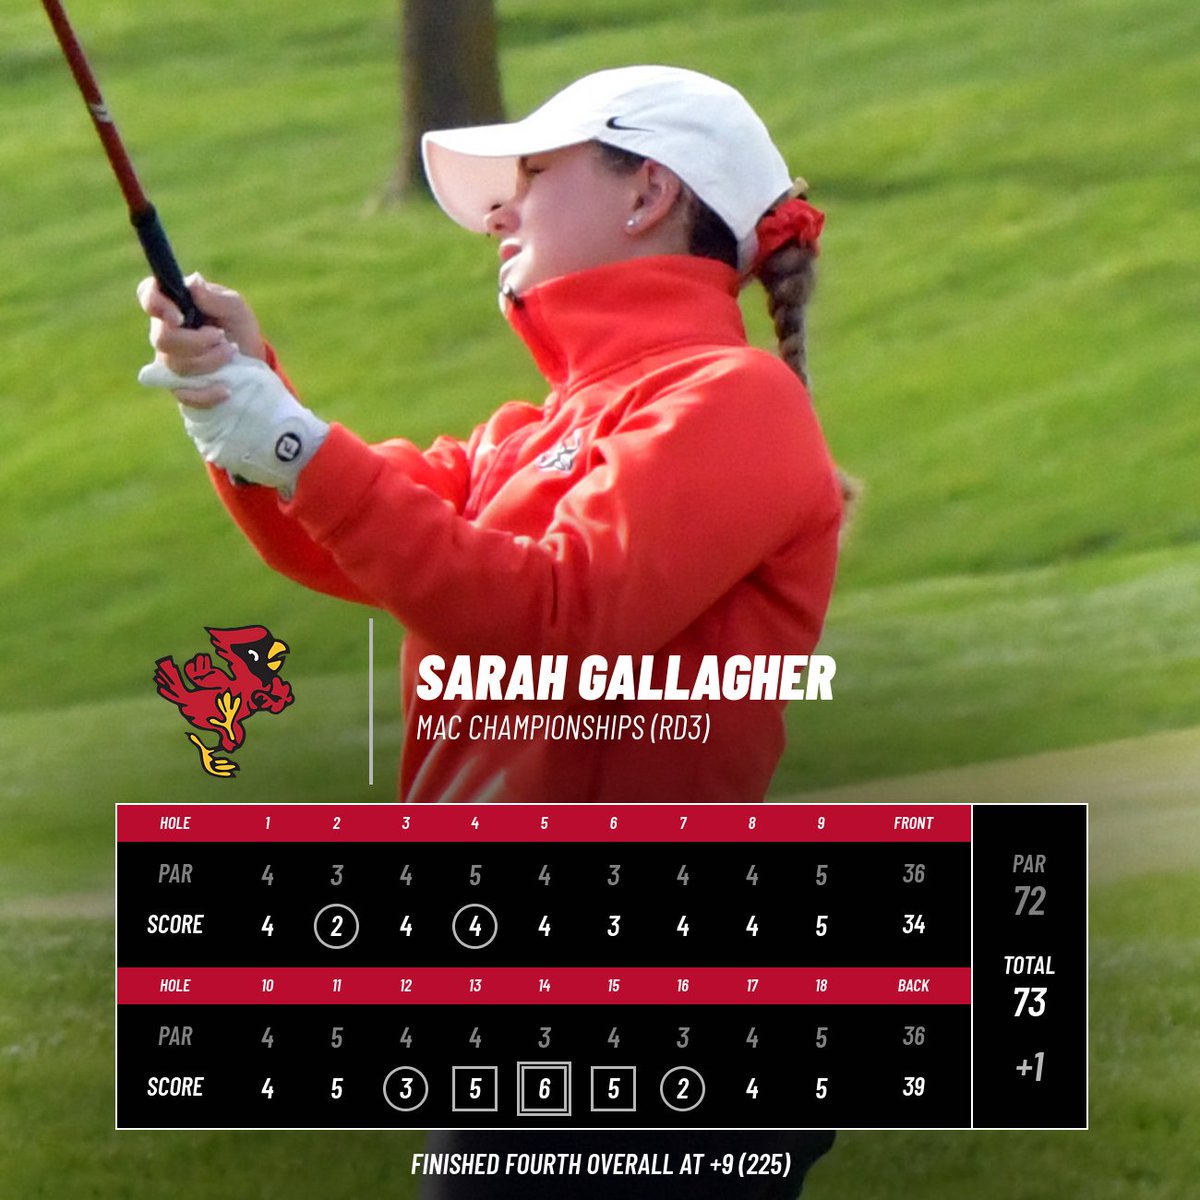 “I was very proud of the way we finished off the season today with a really solid round,' @camerons234
✔️- 2nd Lowest Team Round of the Day (+16)
✔️- Finished 4th as a Team
✔️- @Sarahngallagher Placed 4th overall (+9)

📰: bit.ly/3QfoCEW

#ChirpChirp x #WeFly x #MACtion